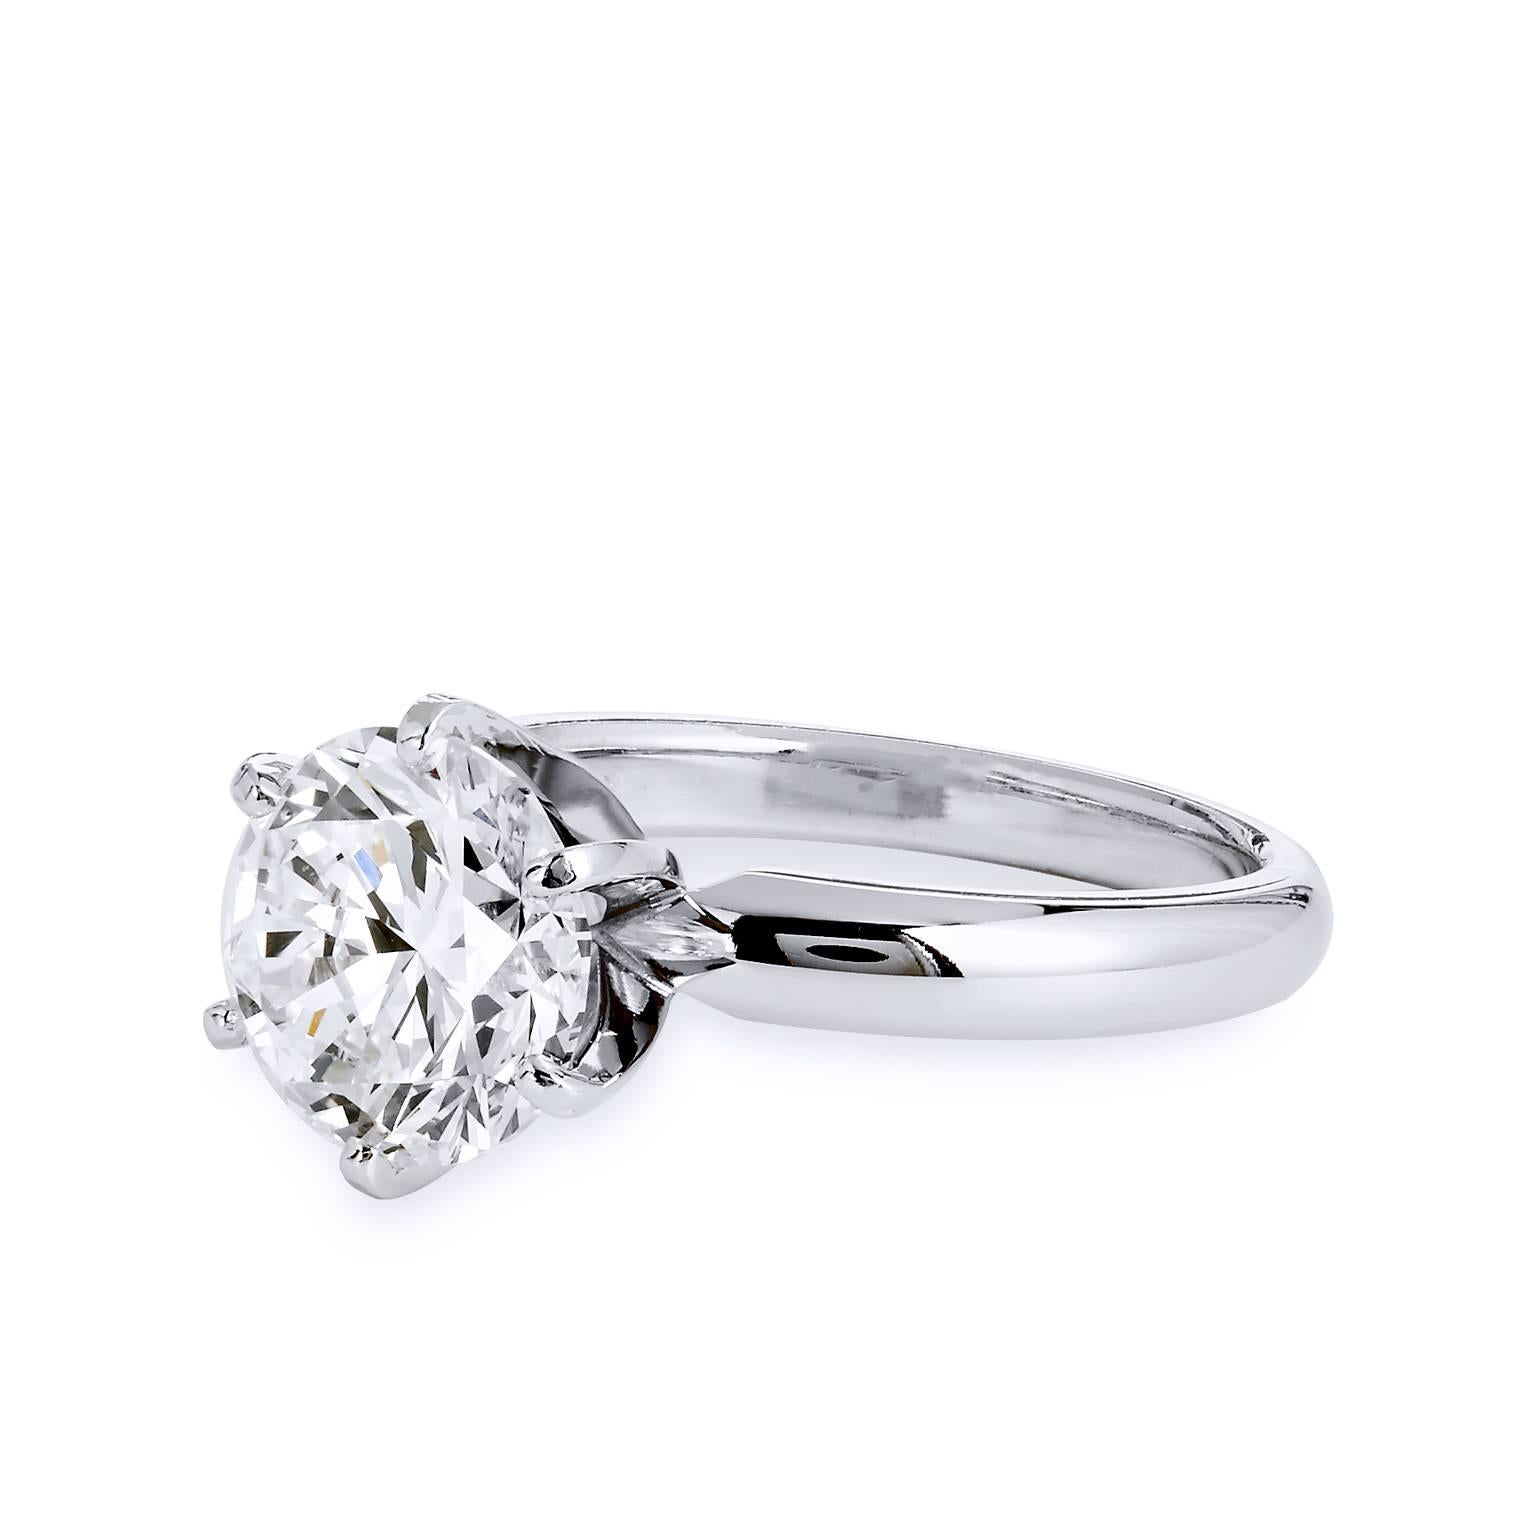 GIA Certified 3.04 Carat Diamond Platinum 4 Prong Solitaire Engagement Ring 1